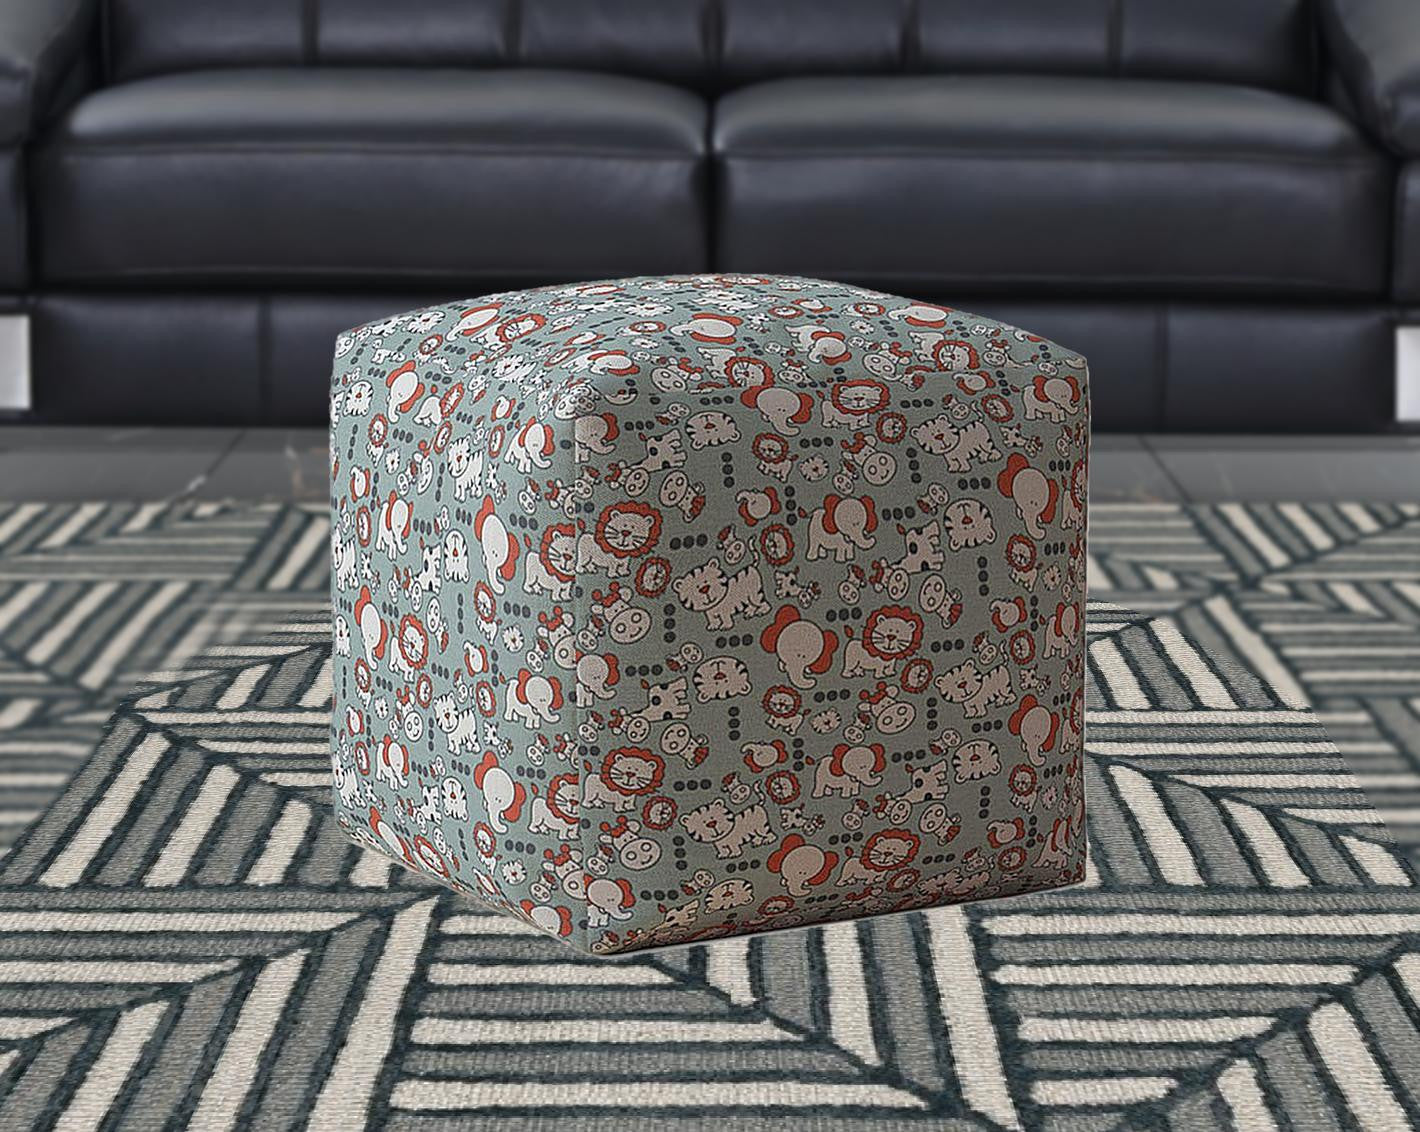 17" Gray And White Cotton Animal Print Pouf Cover